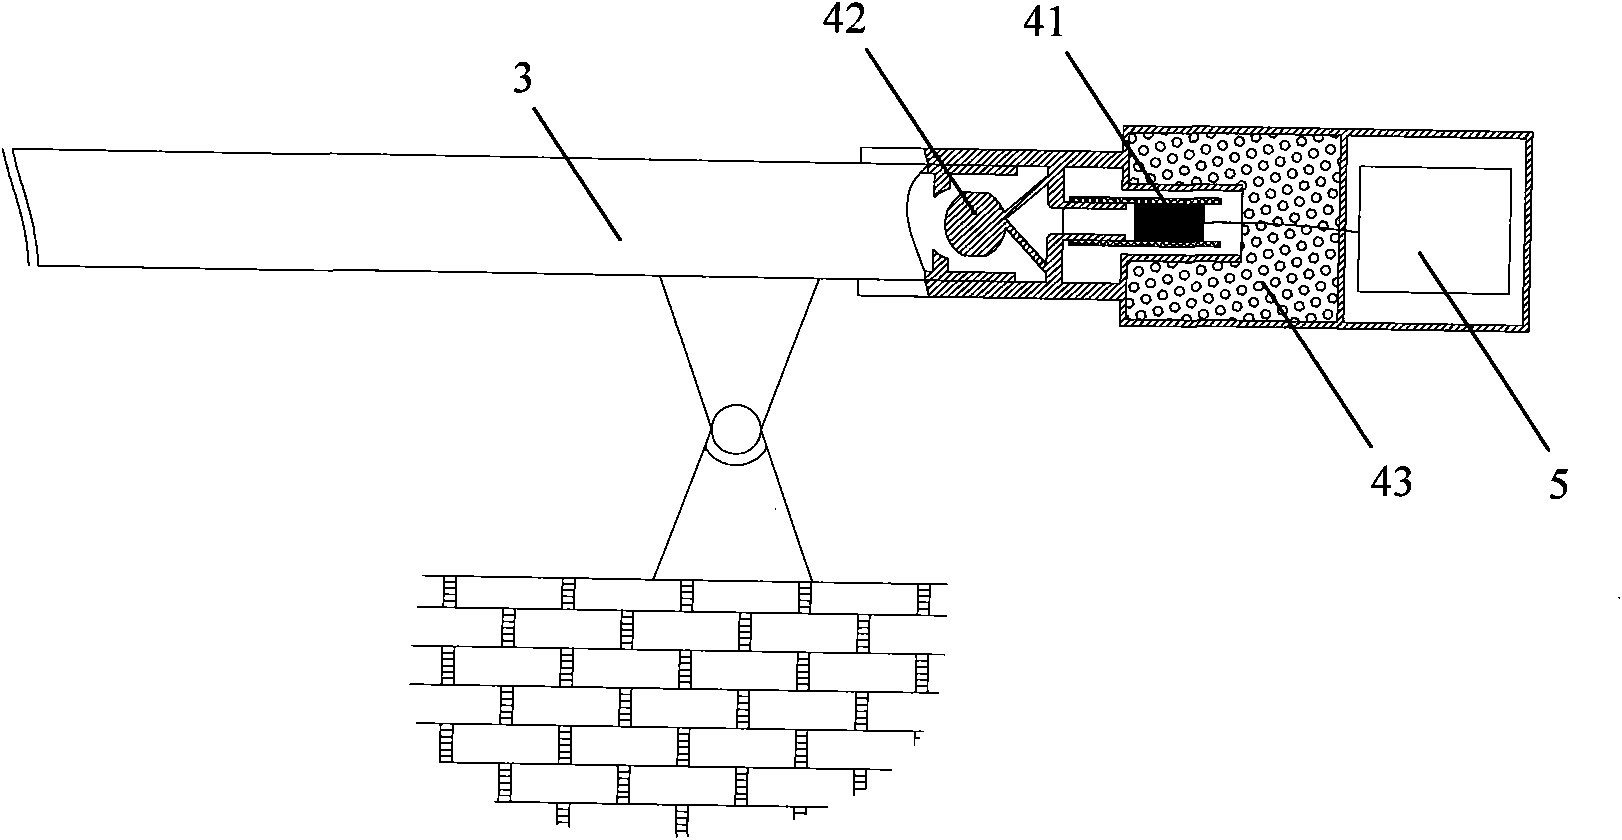 System and method for monitoring pipeline vibration